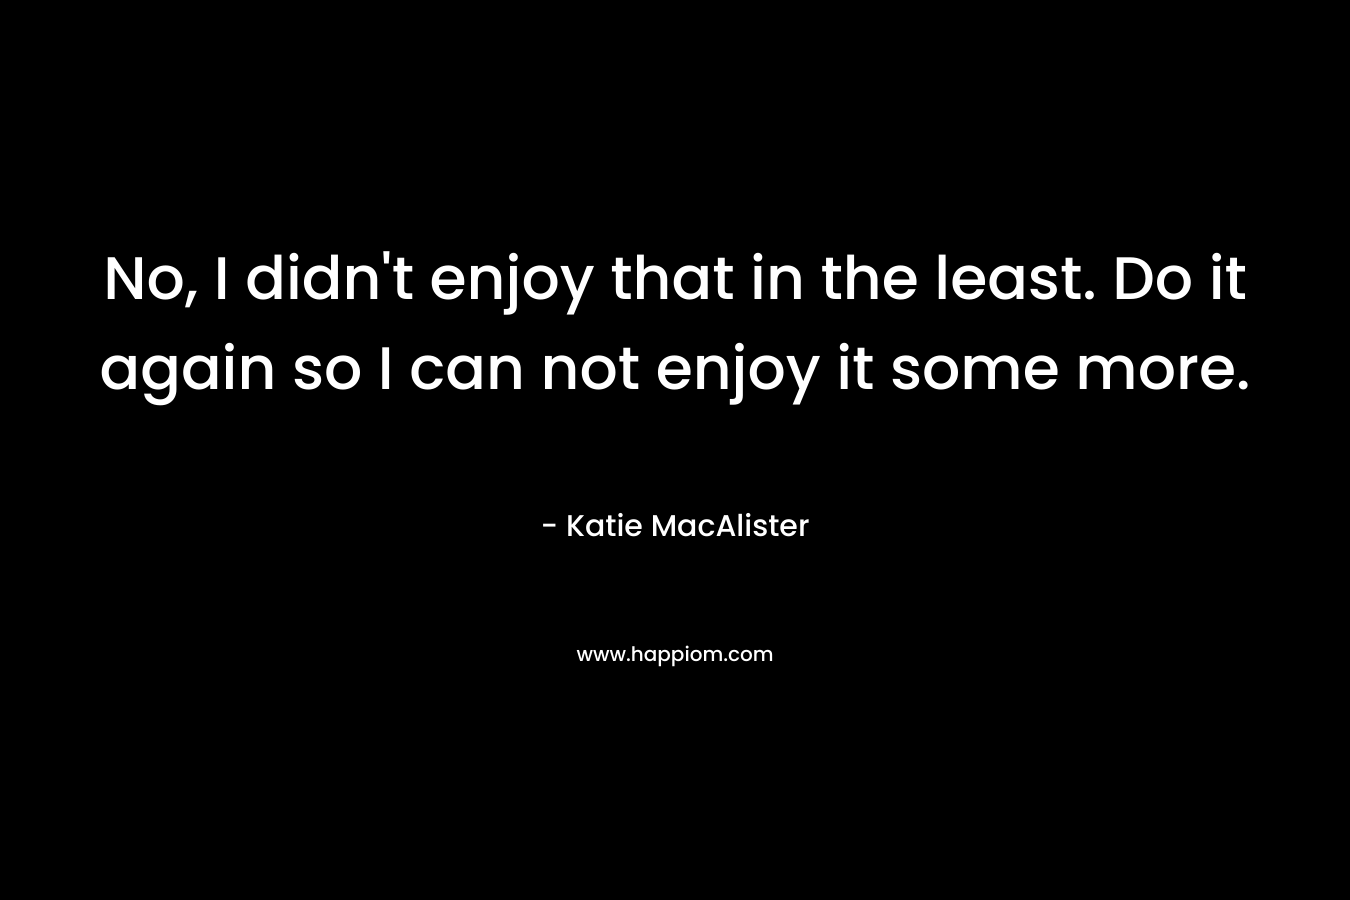 No, I didn’t enjoy that in the least. Do it again so I can not enjoy it some more. – Katie MacAlister